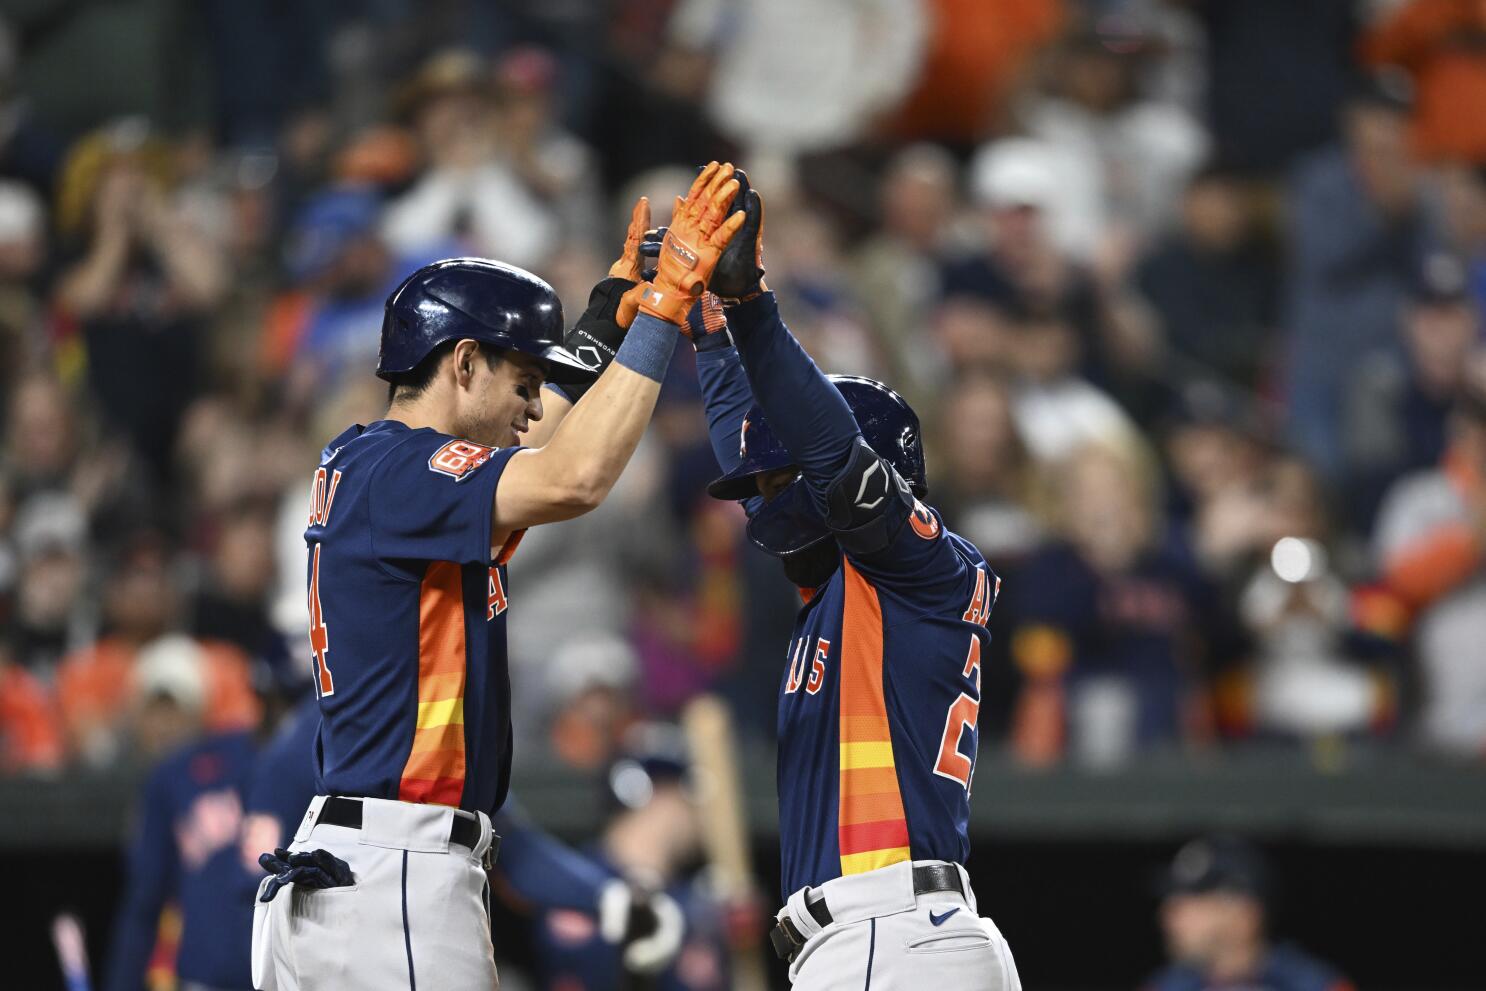 Astros rally past Orioles to give Baker milestone 100th win - The